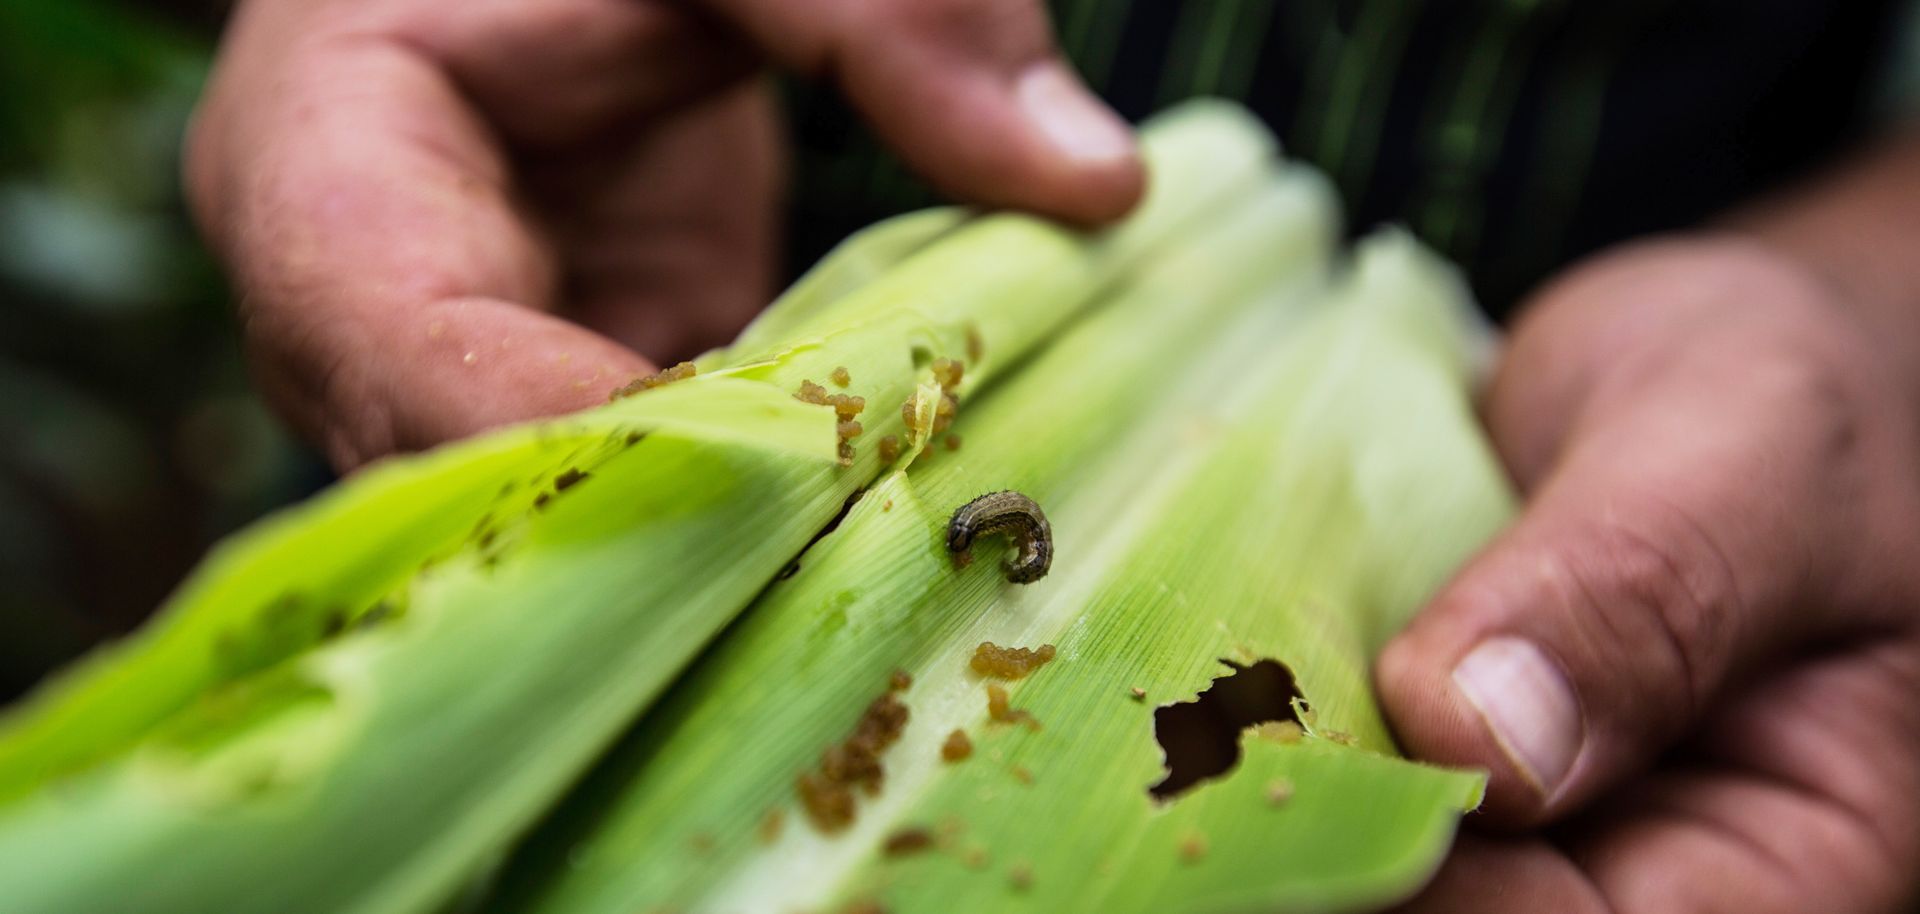 An infestation of fall armyworms, a pest native to the Americas, is damaging crops across southern Africa, especially corn, threatening the livelihoods of the region's subsistence farmers.